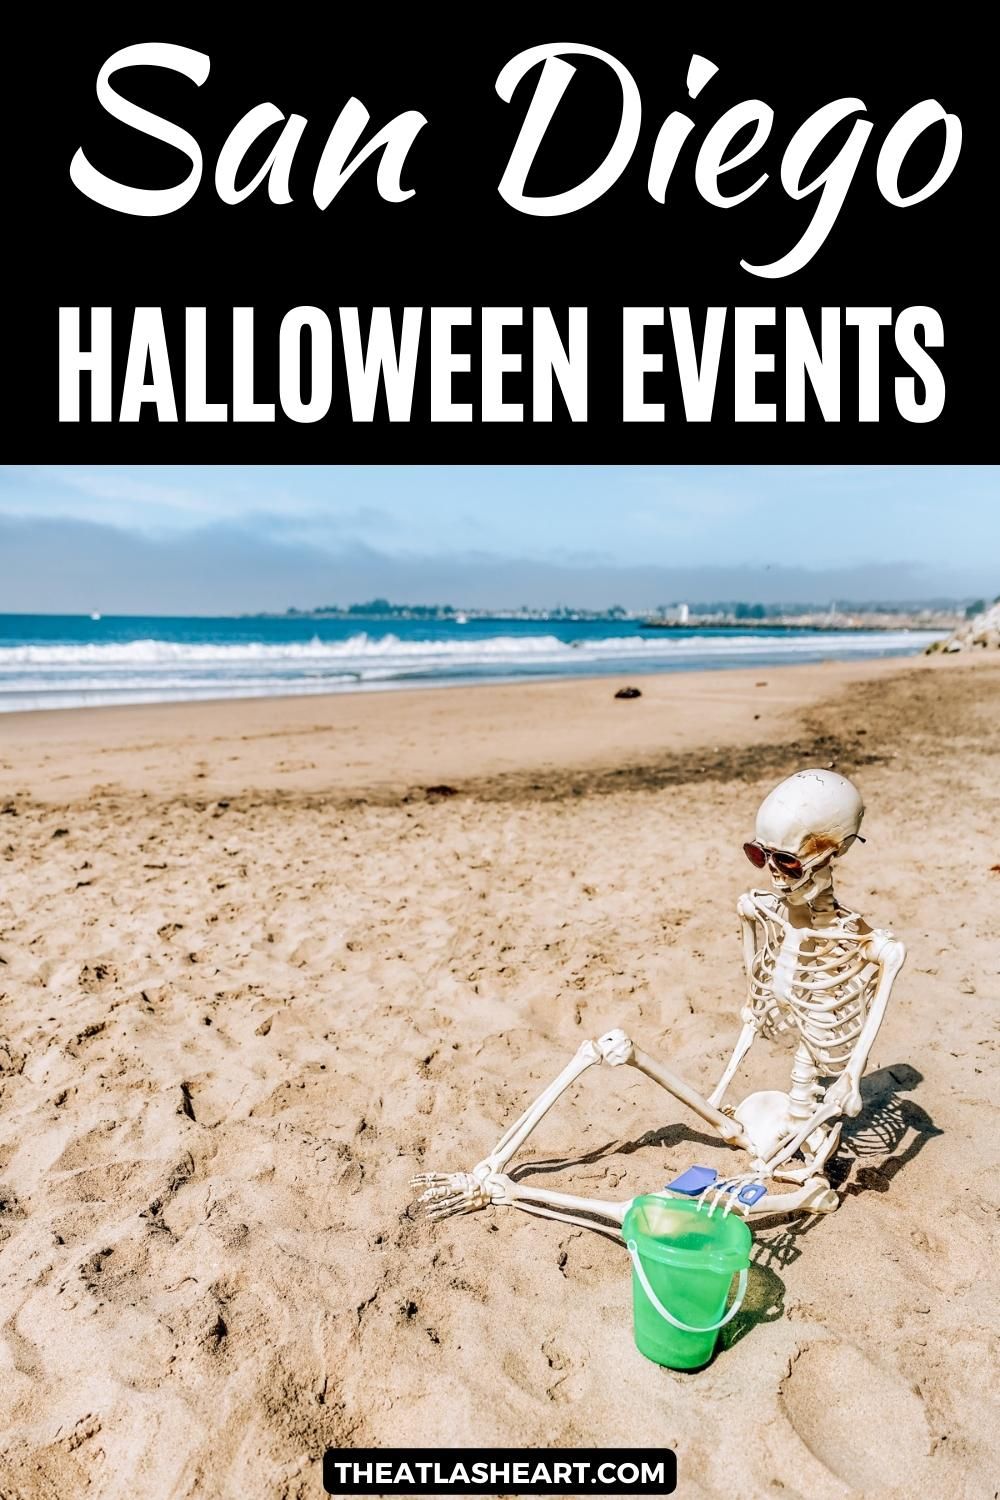 A skeleton wearing sunglasses posed sitting on a a Southern California beach, with a bucket and shovel in hand, and the text overlay, "Halloween Events in San Diego."